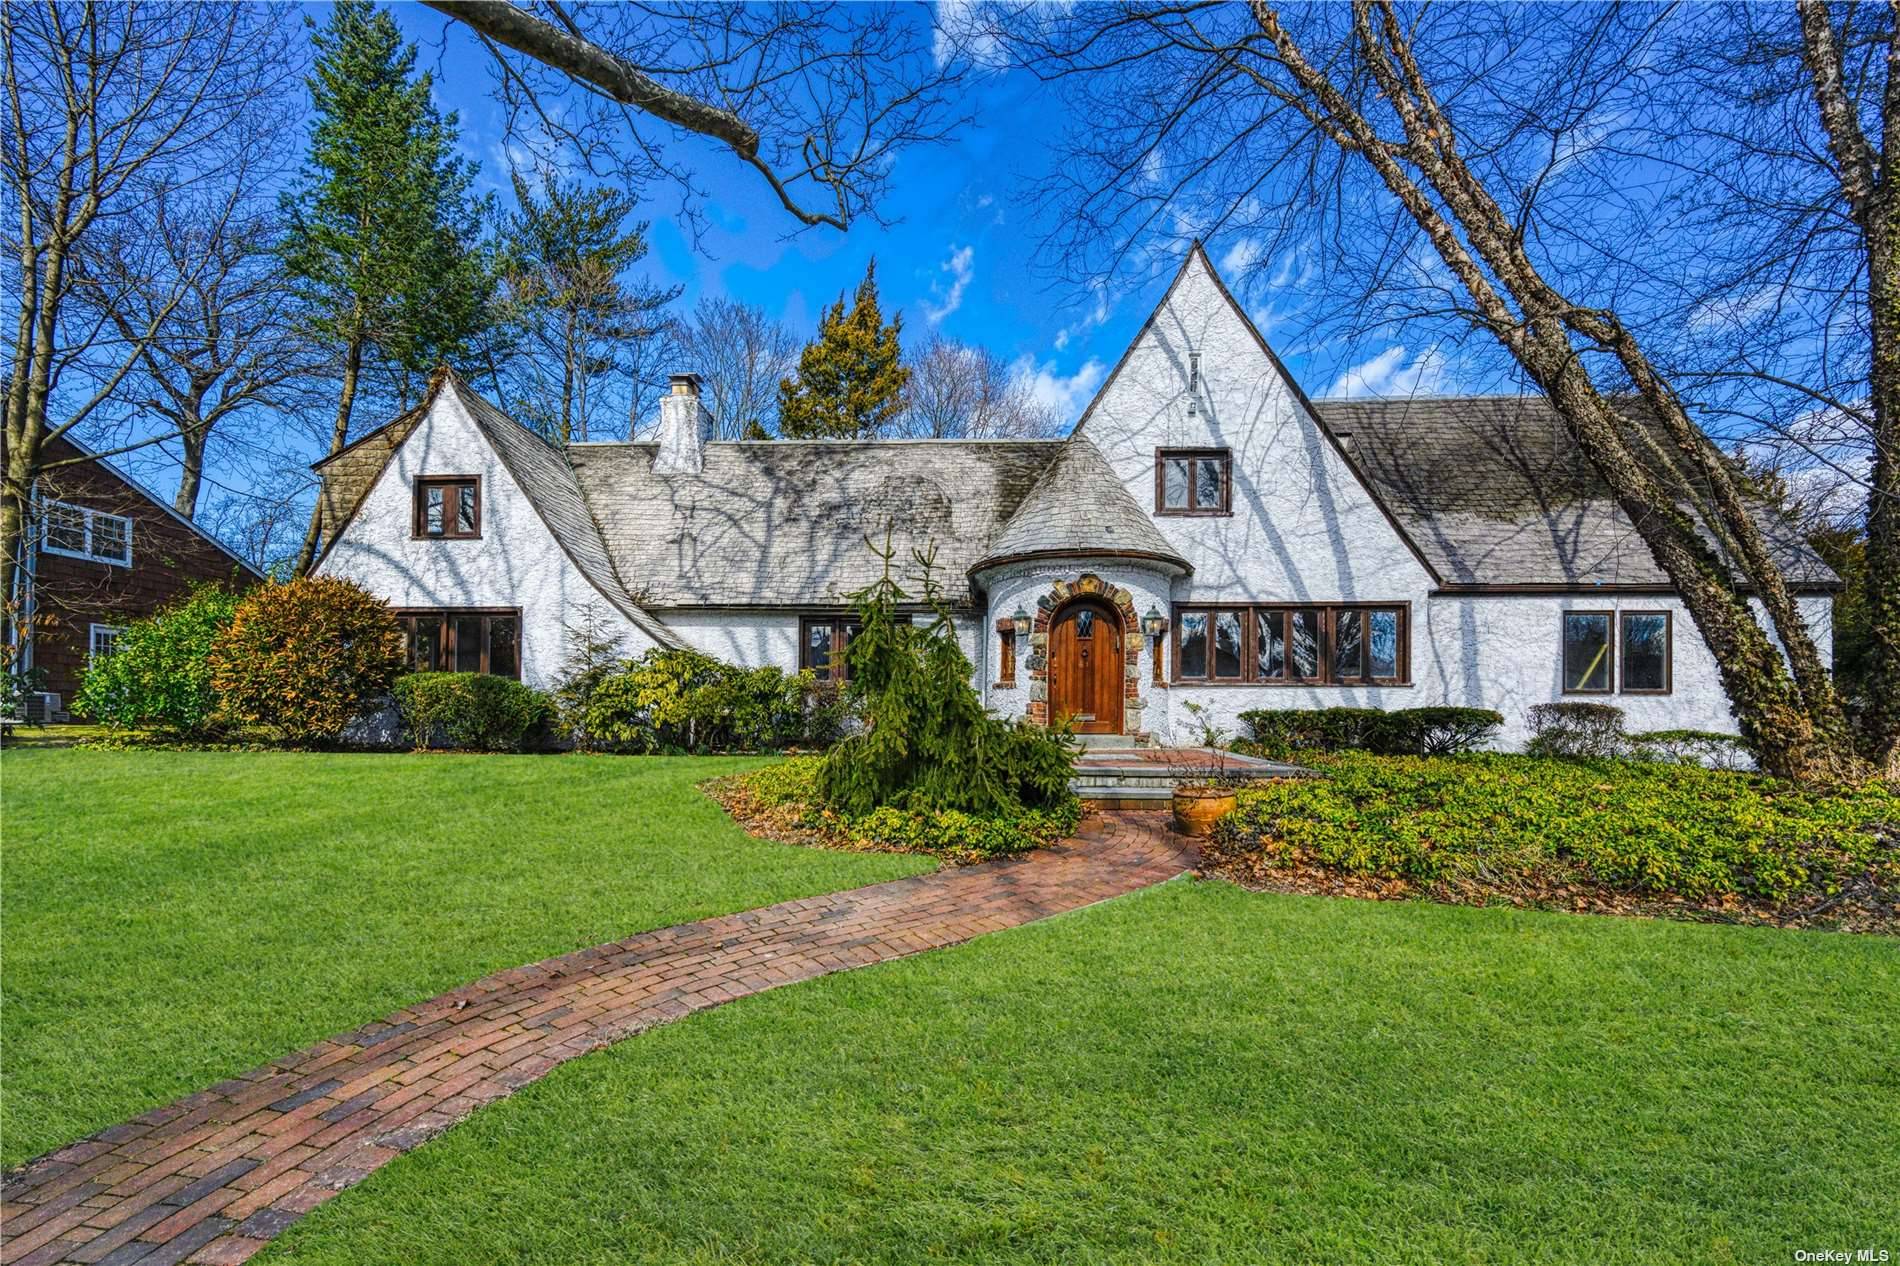 Magnificent Gold Coast Tudor combines old world elegance with modern convenience.